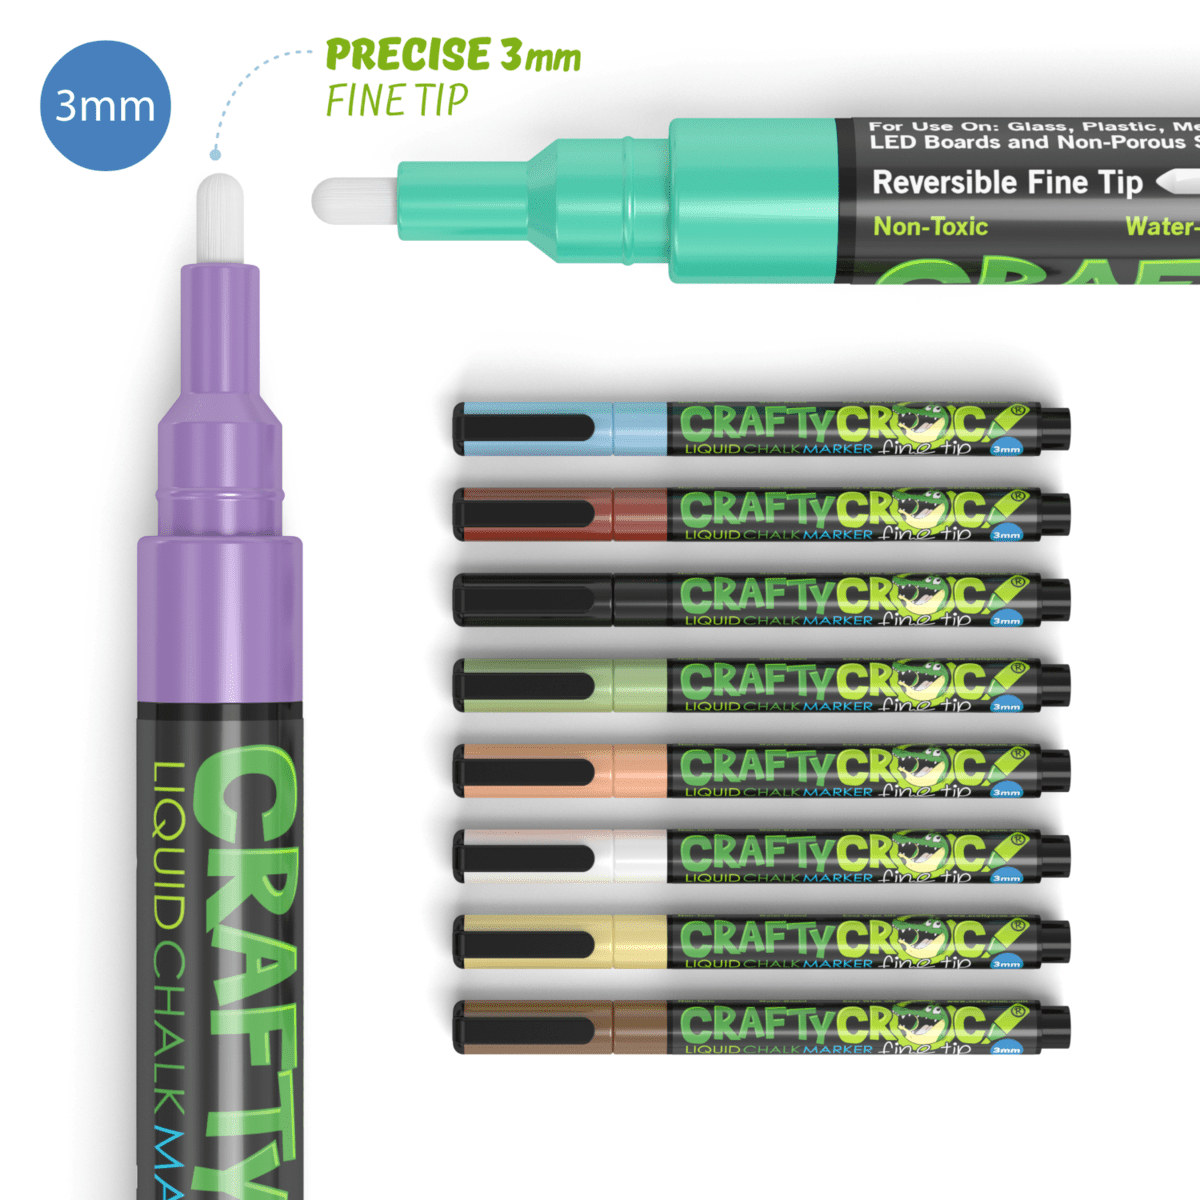 Crafty Croc Fine Tip Chalk Markers (Precise 3mm Tip, 10 Earth Tone Colors) Erasable Dustless Liquid Chalk Ink Pens, Waterbased, Nontoxic